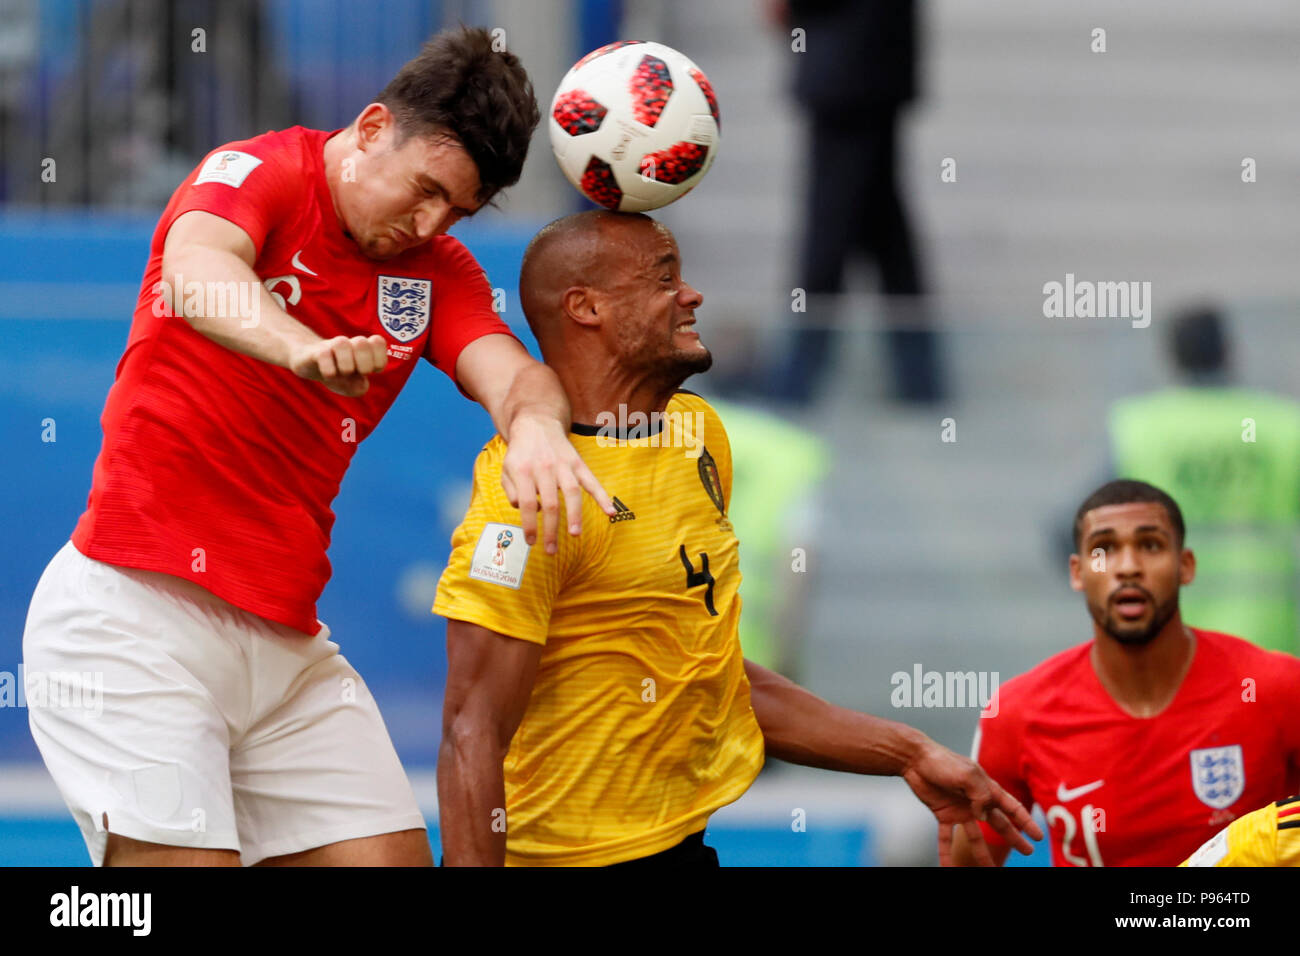 SAINT PETERSBURG, RUSSIA - JULY 14: Vincent Kompany (C) of Belgium and Harry Maguire (L) of England vie for a header during the 2018 FIFA World Cup Russia 3rd Place Playoff match between Belgium and England at Saint Petersburg Stadium on July 14, 2018 in Saint Petersburg, Russia. (MB Media) Stock Photo